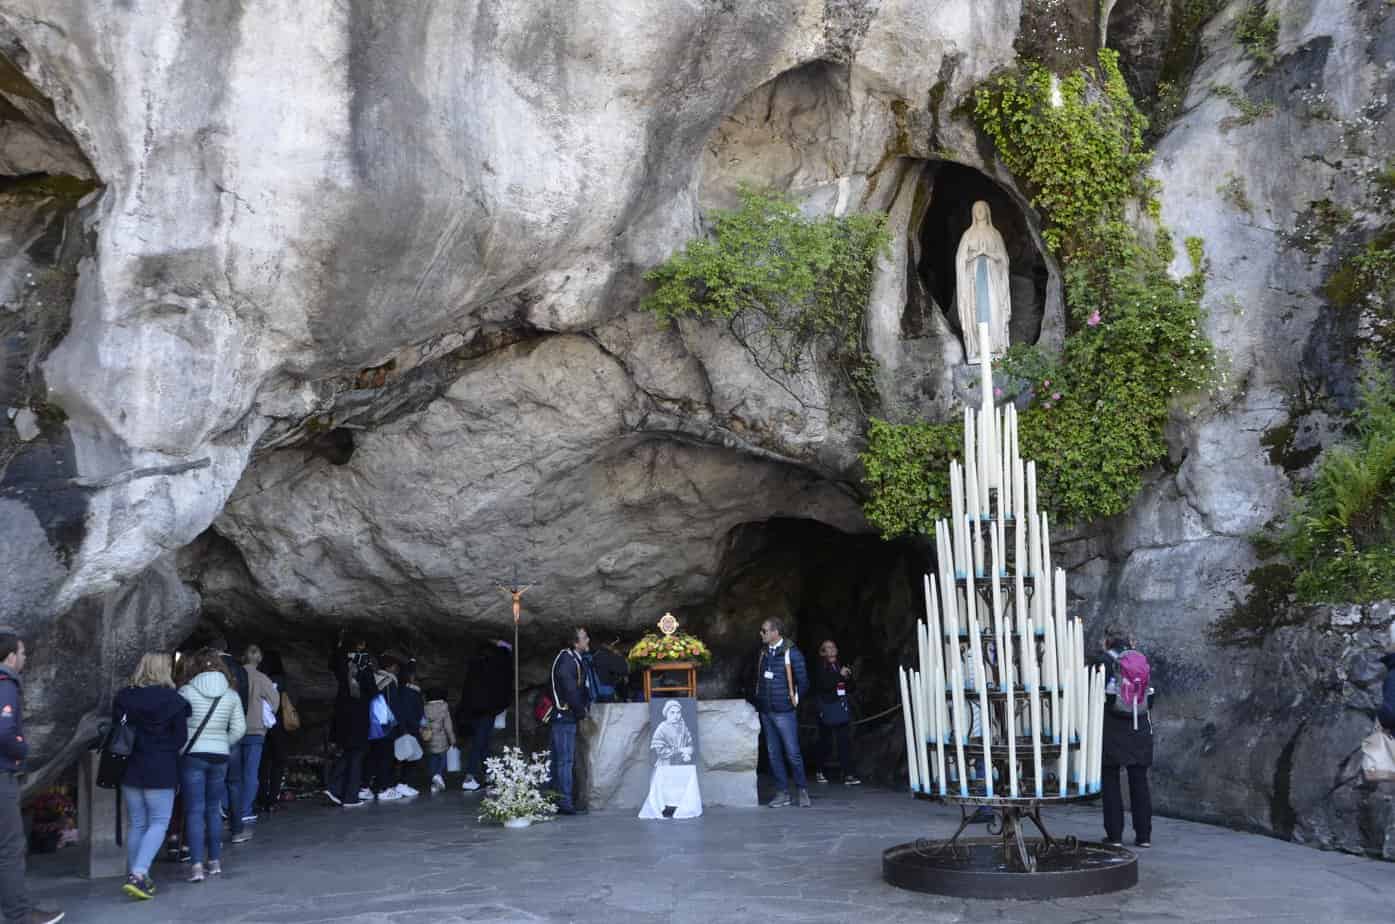 Lourdes France Our Lady Of Lourdes Site Of Healing And Hope The Catholic Travel Guide